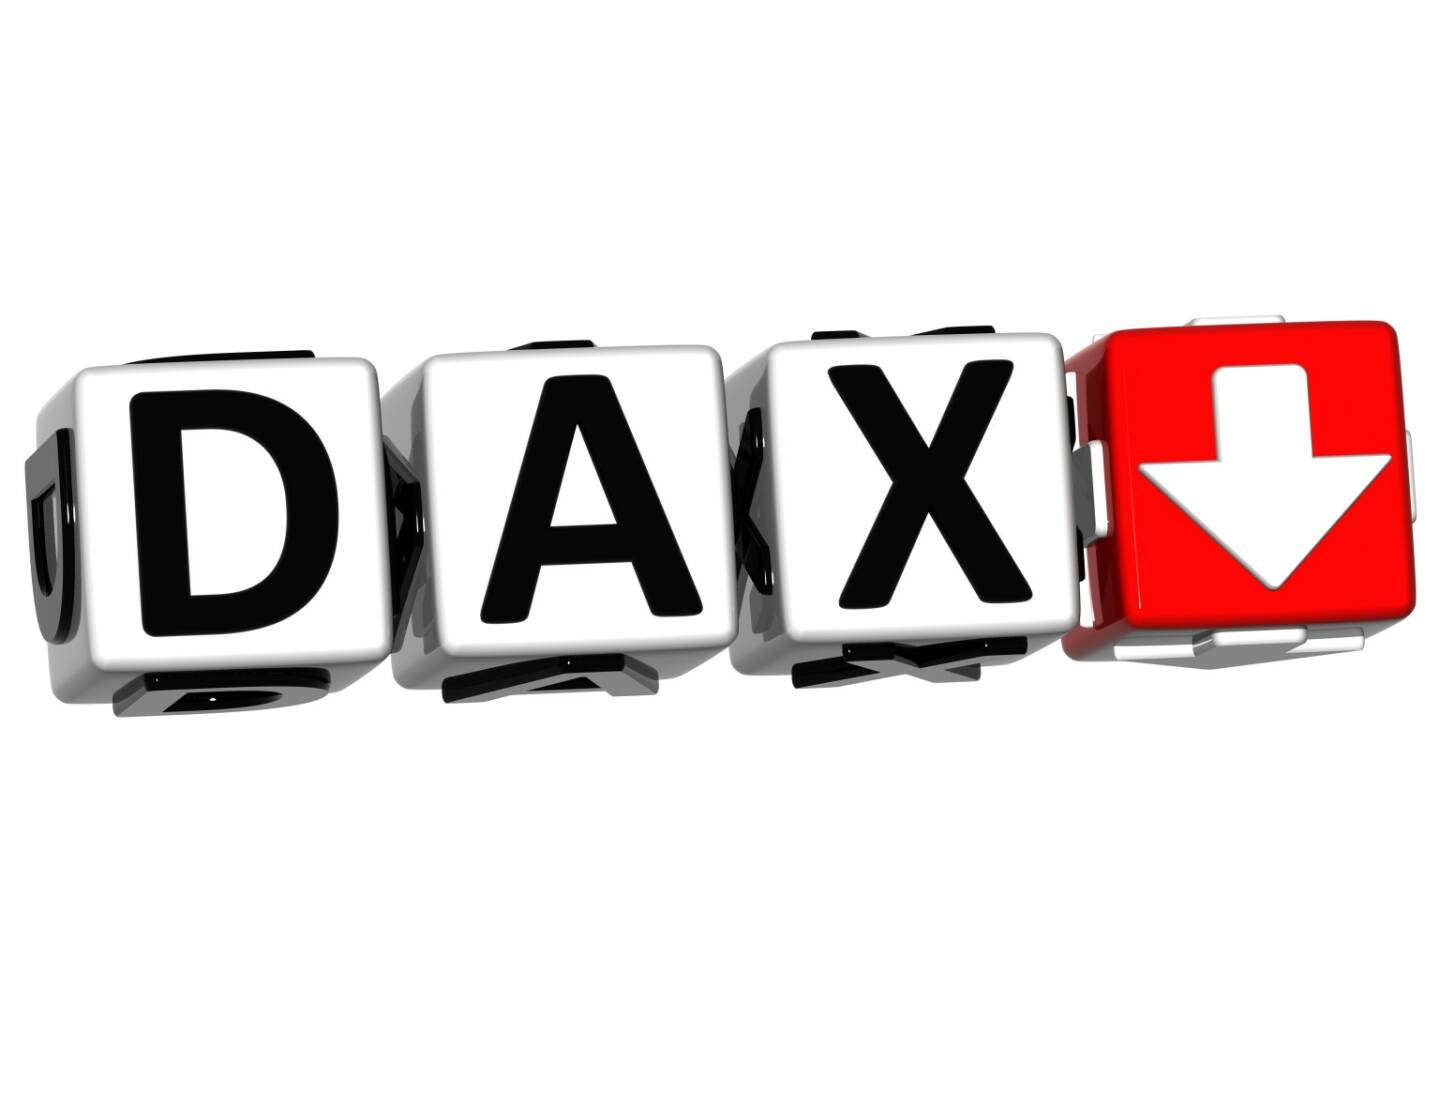 DAX. rot, fällt, http://www.shutterstock.com/pic-98643020/stock-photo--d-dax-stock-market-block-text-on-white-background.html